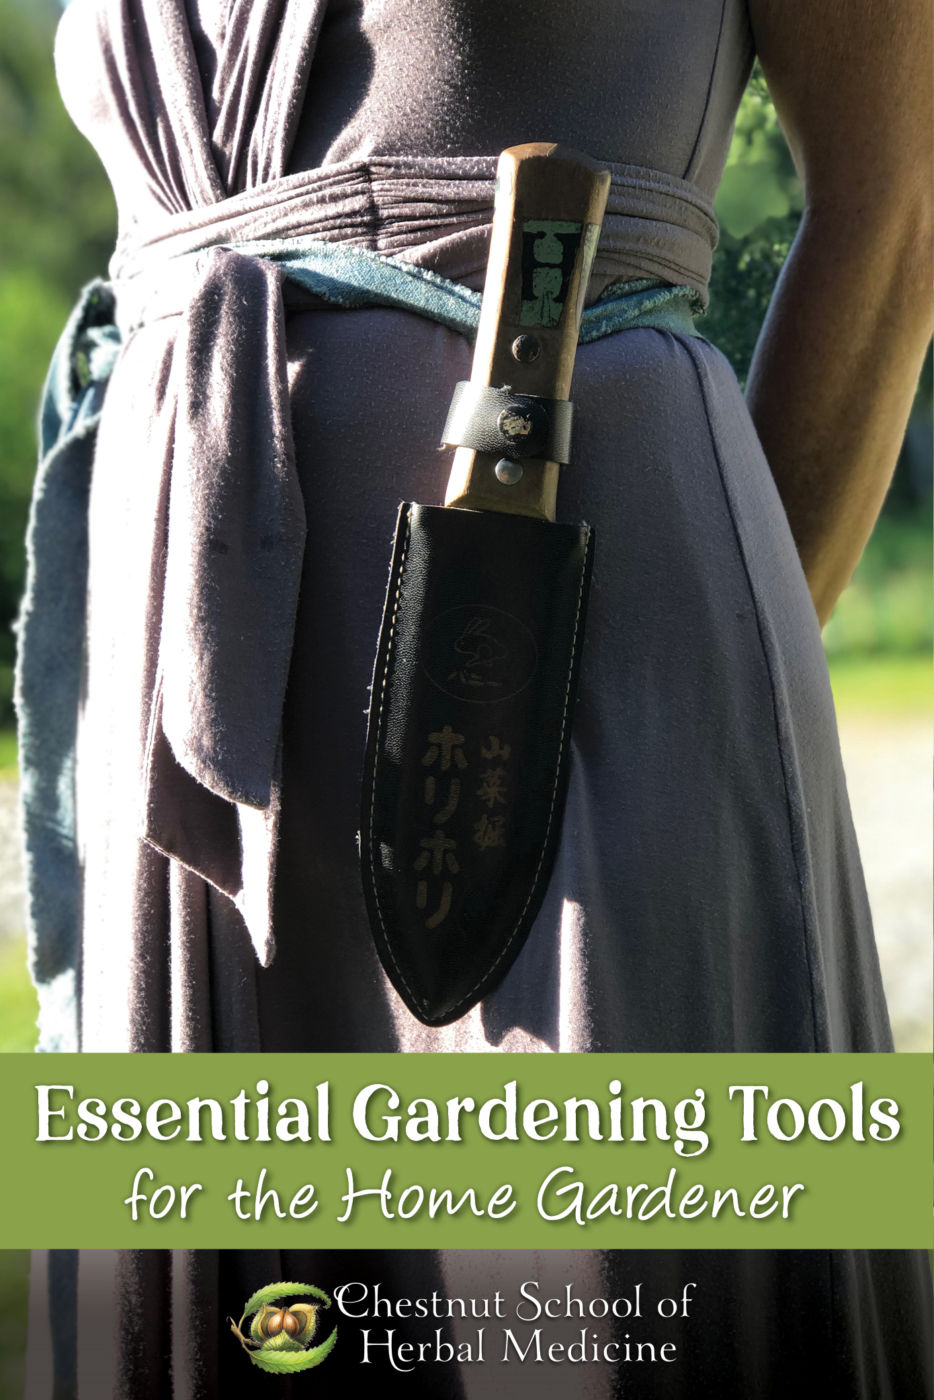 Essential Gardening Tools for the Home Gardener.